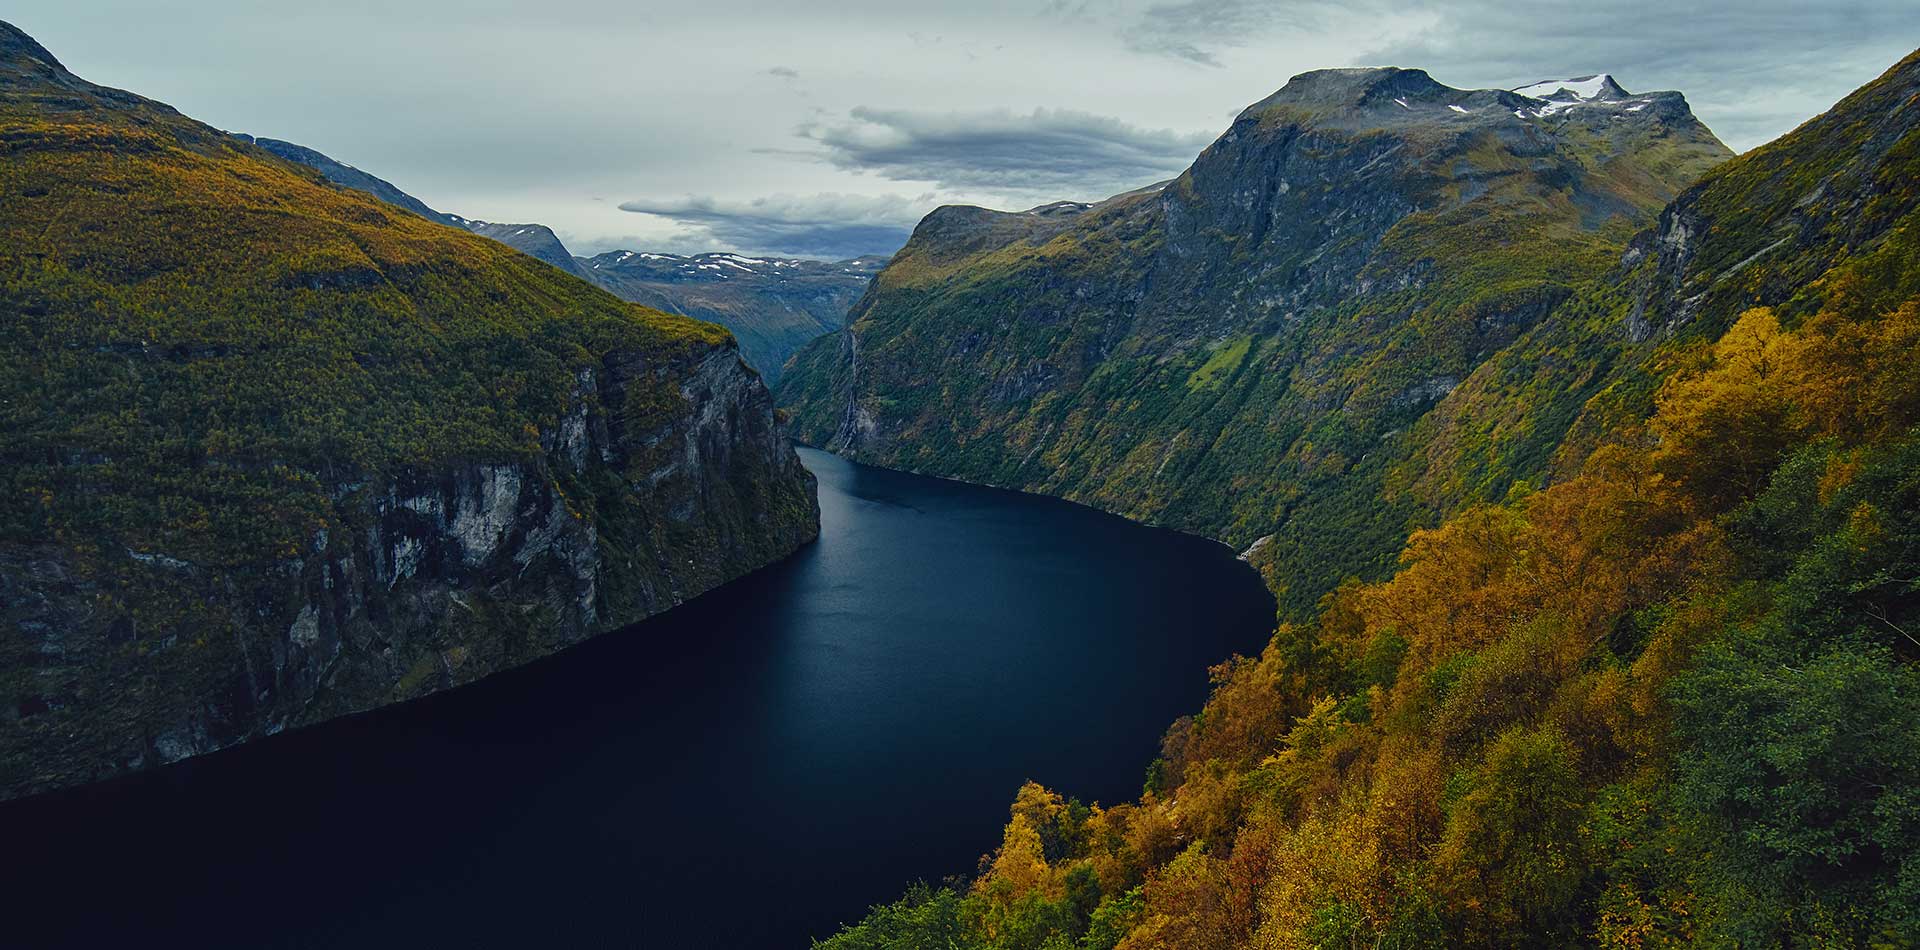 Cruise to the Norwegian Fjords in Autumn